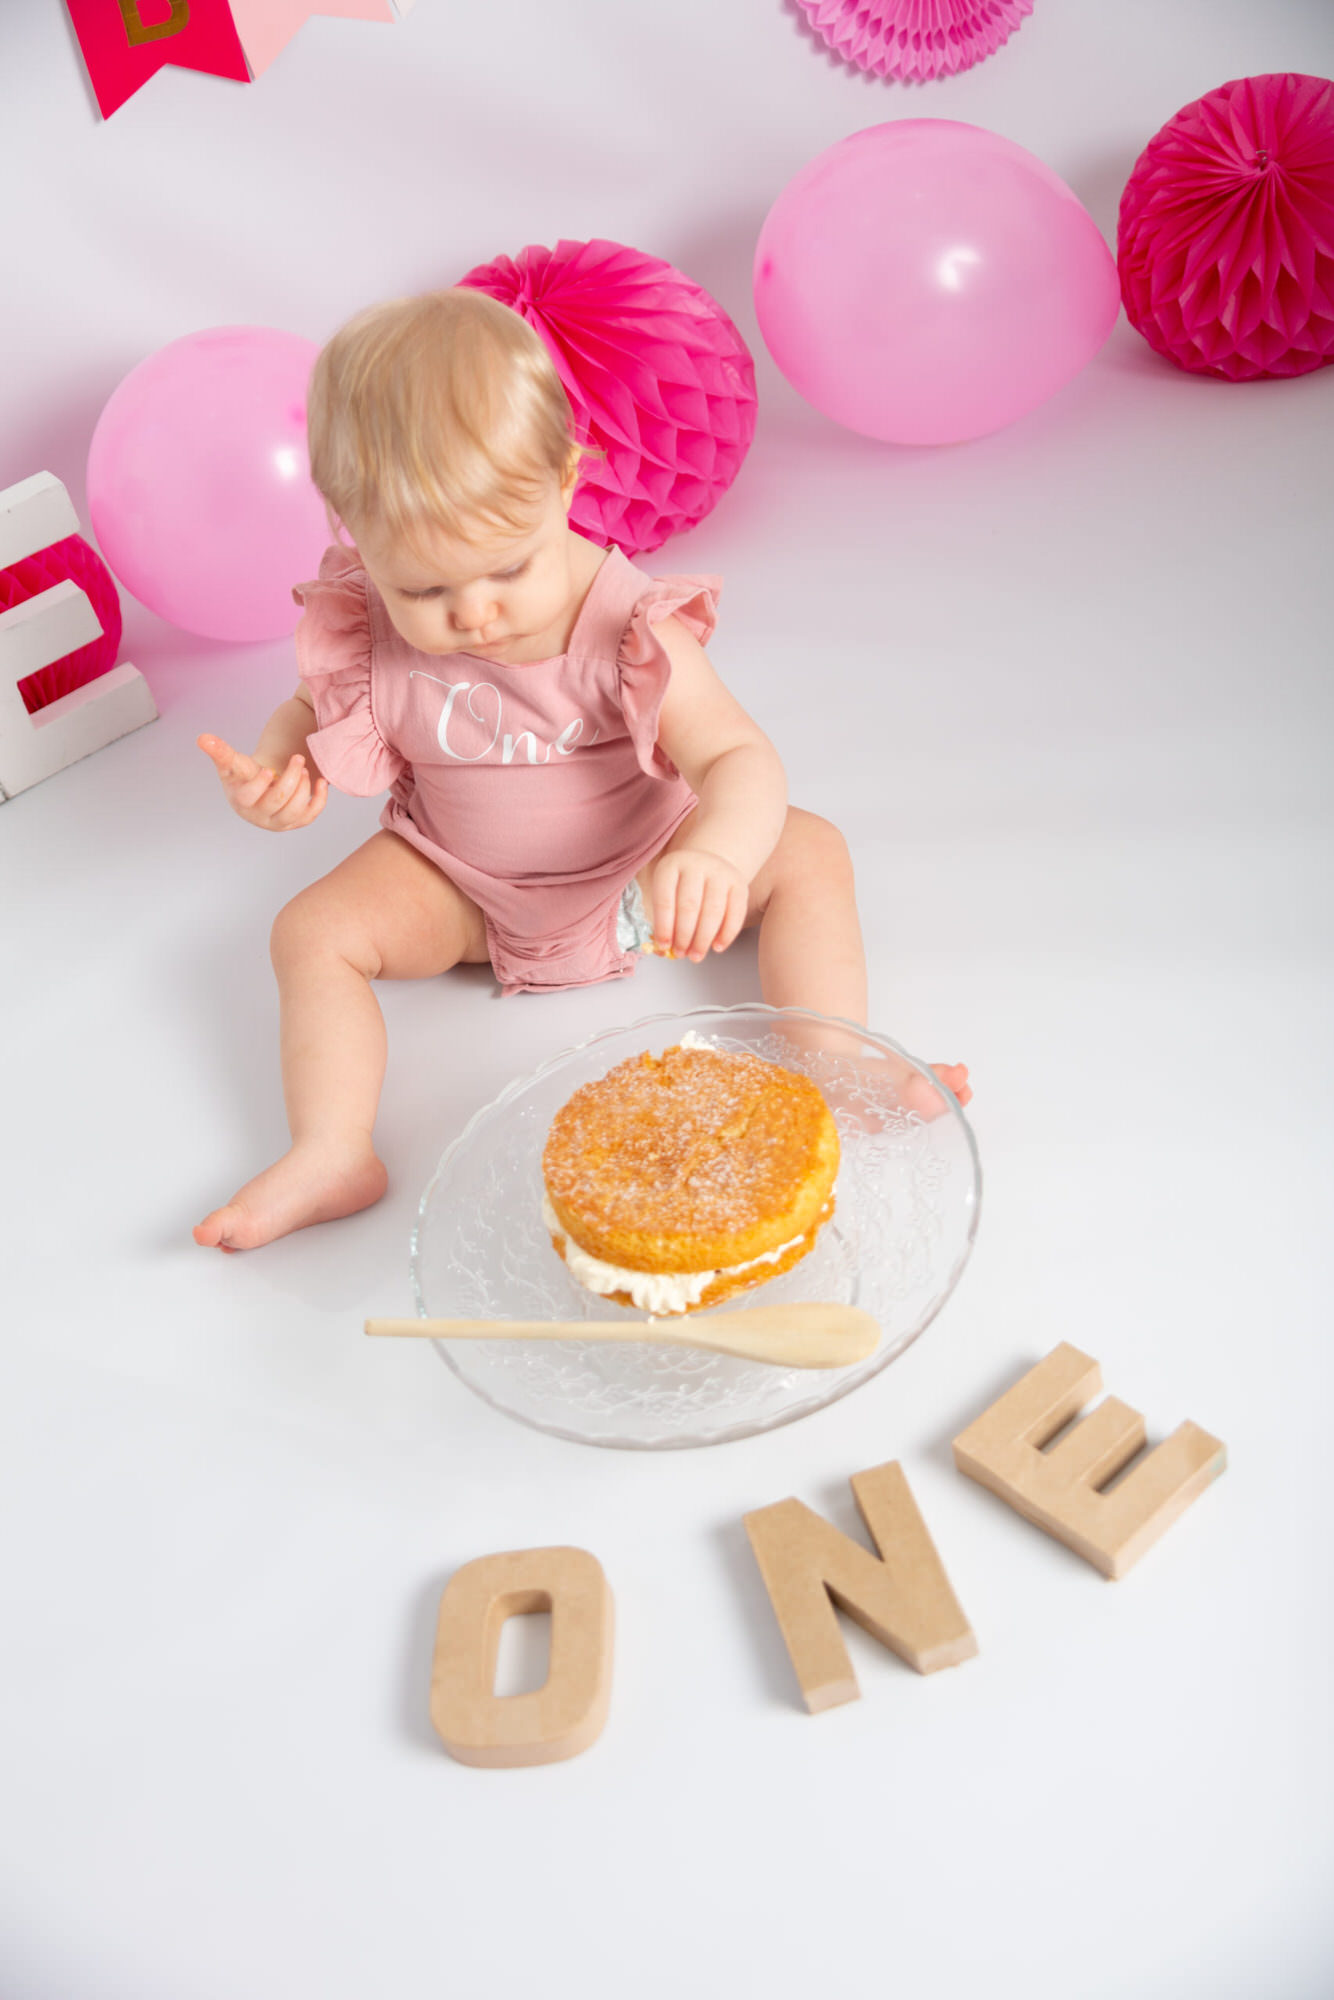 what is a 1st birthday cake smash?